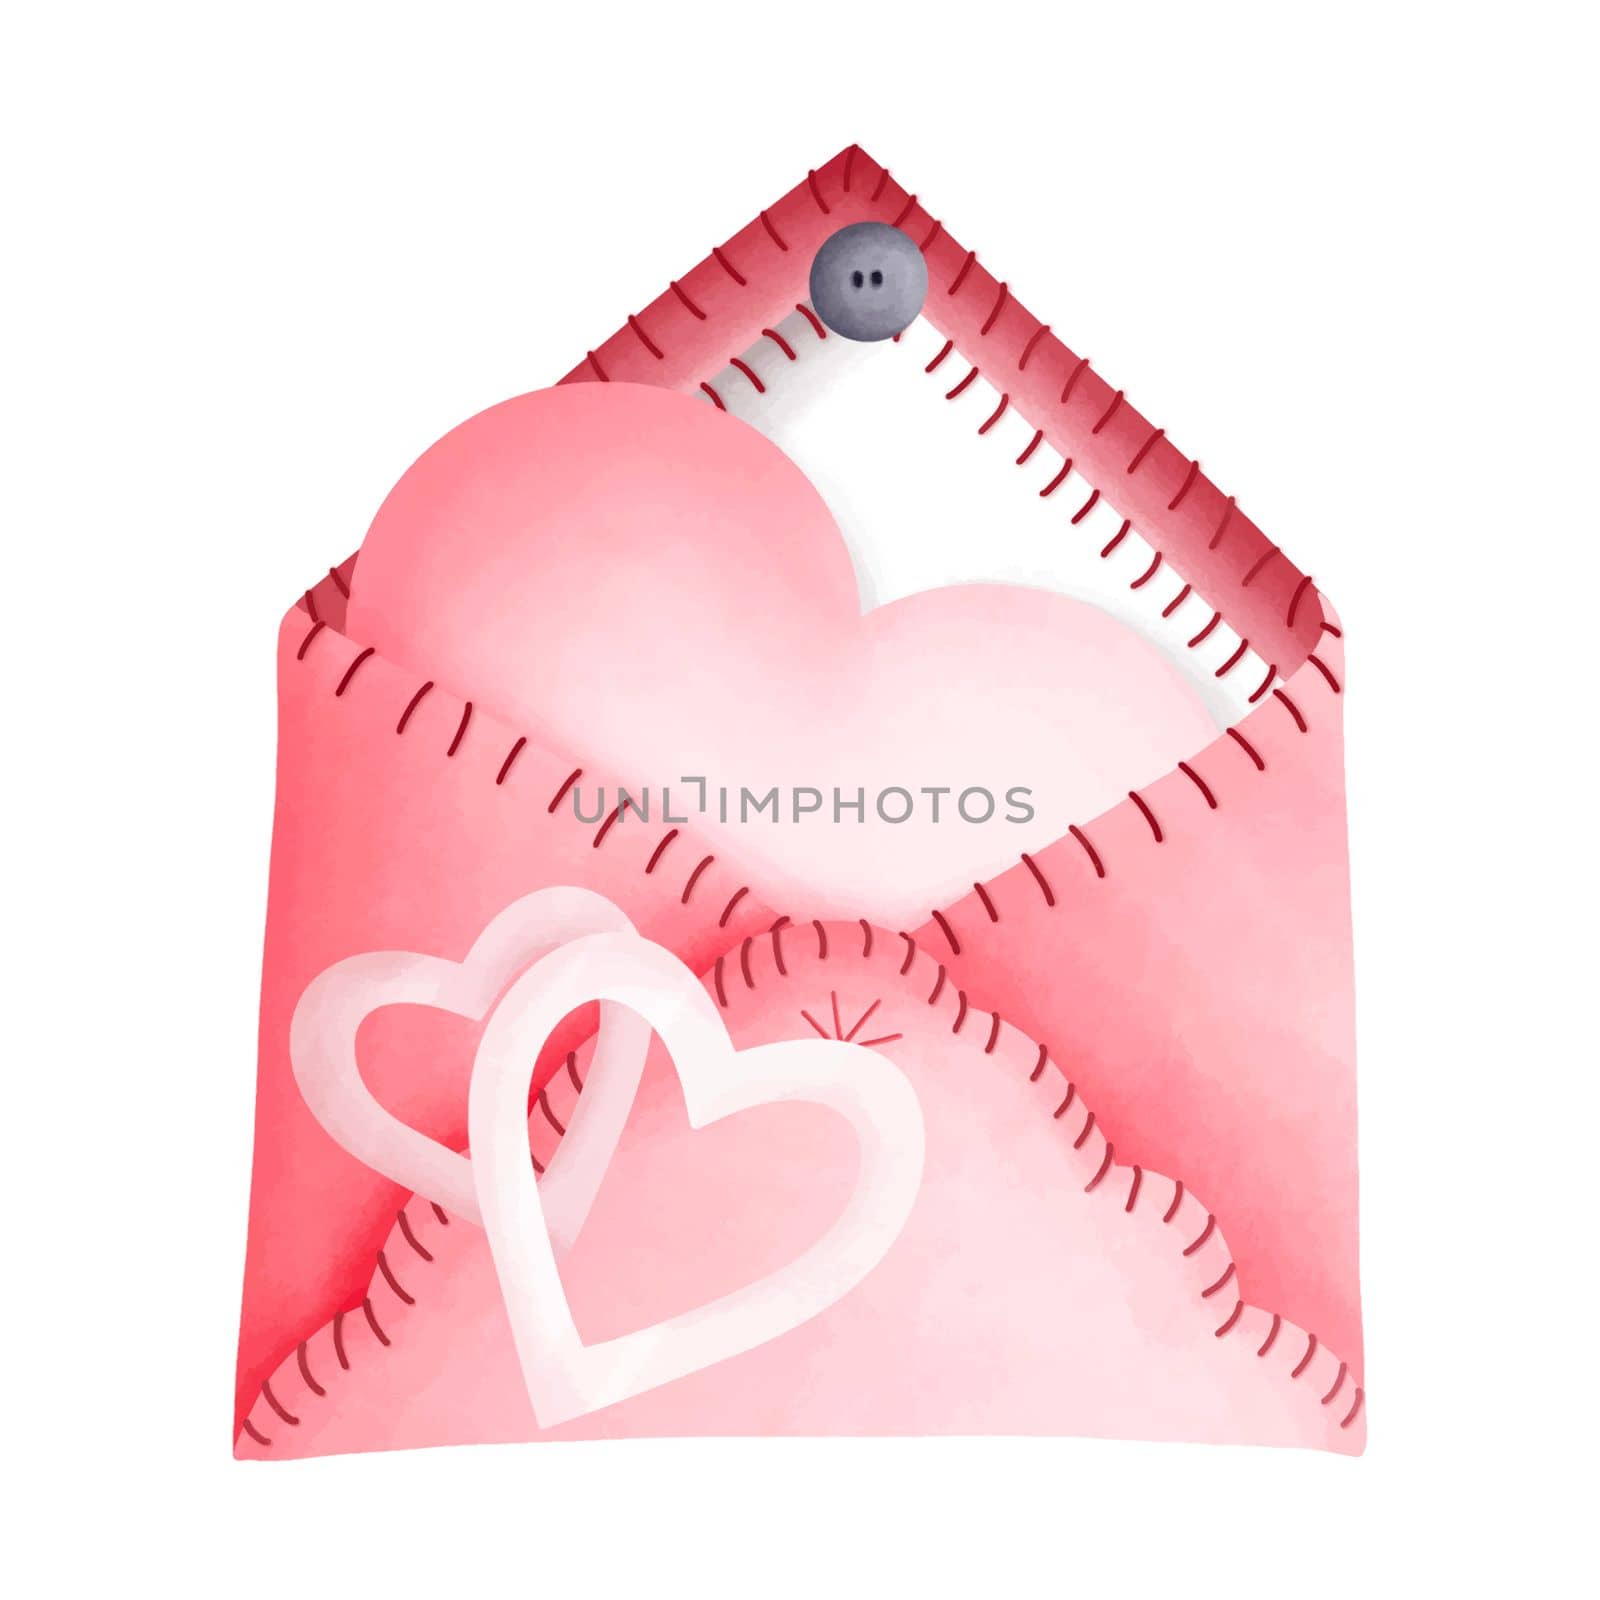 Love letter in Red Envelope  Cute Romantic Watercolor Clipart PNG. Paris In Love collection with diy lovely letter for romantic design element, love art, wedding watercolor illustration. by Skyecreativestudio